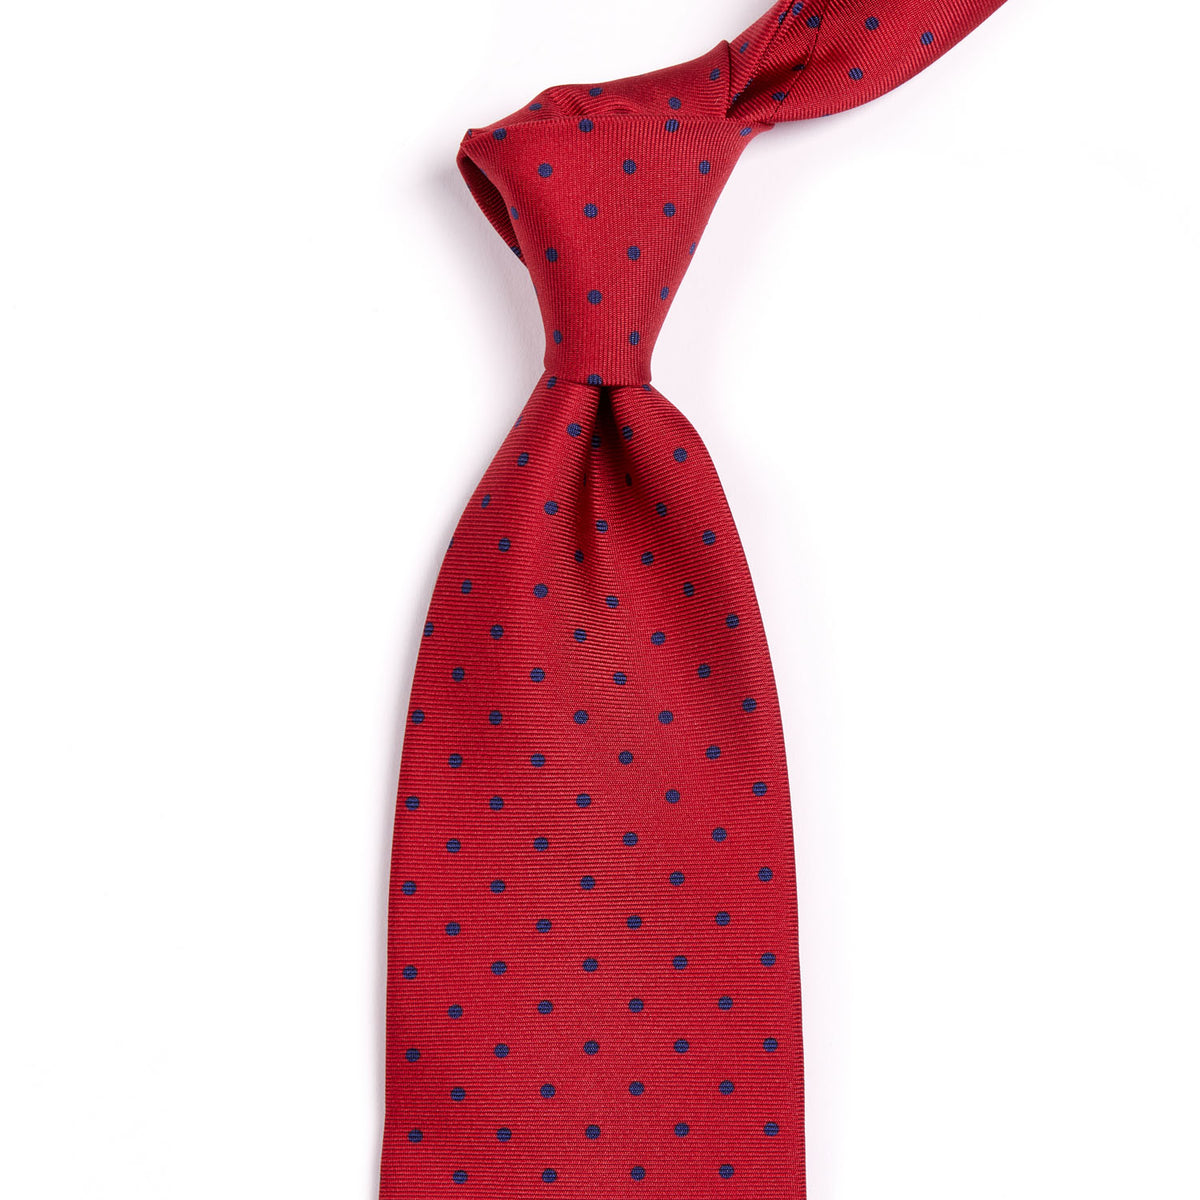 A KirbyAllison.com Sovereign Grade Red London Dot Printed Silk Tie, 150cm from the United Kingdom with quality red and blue dots on a white background.